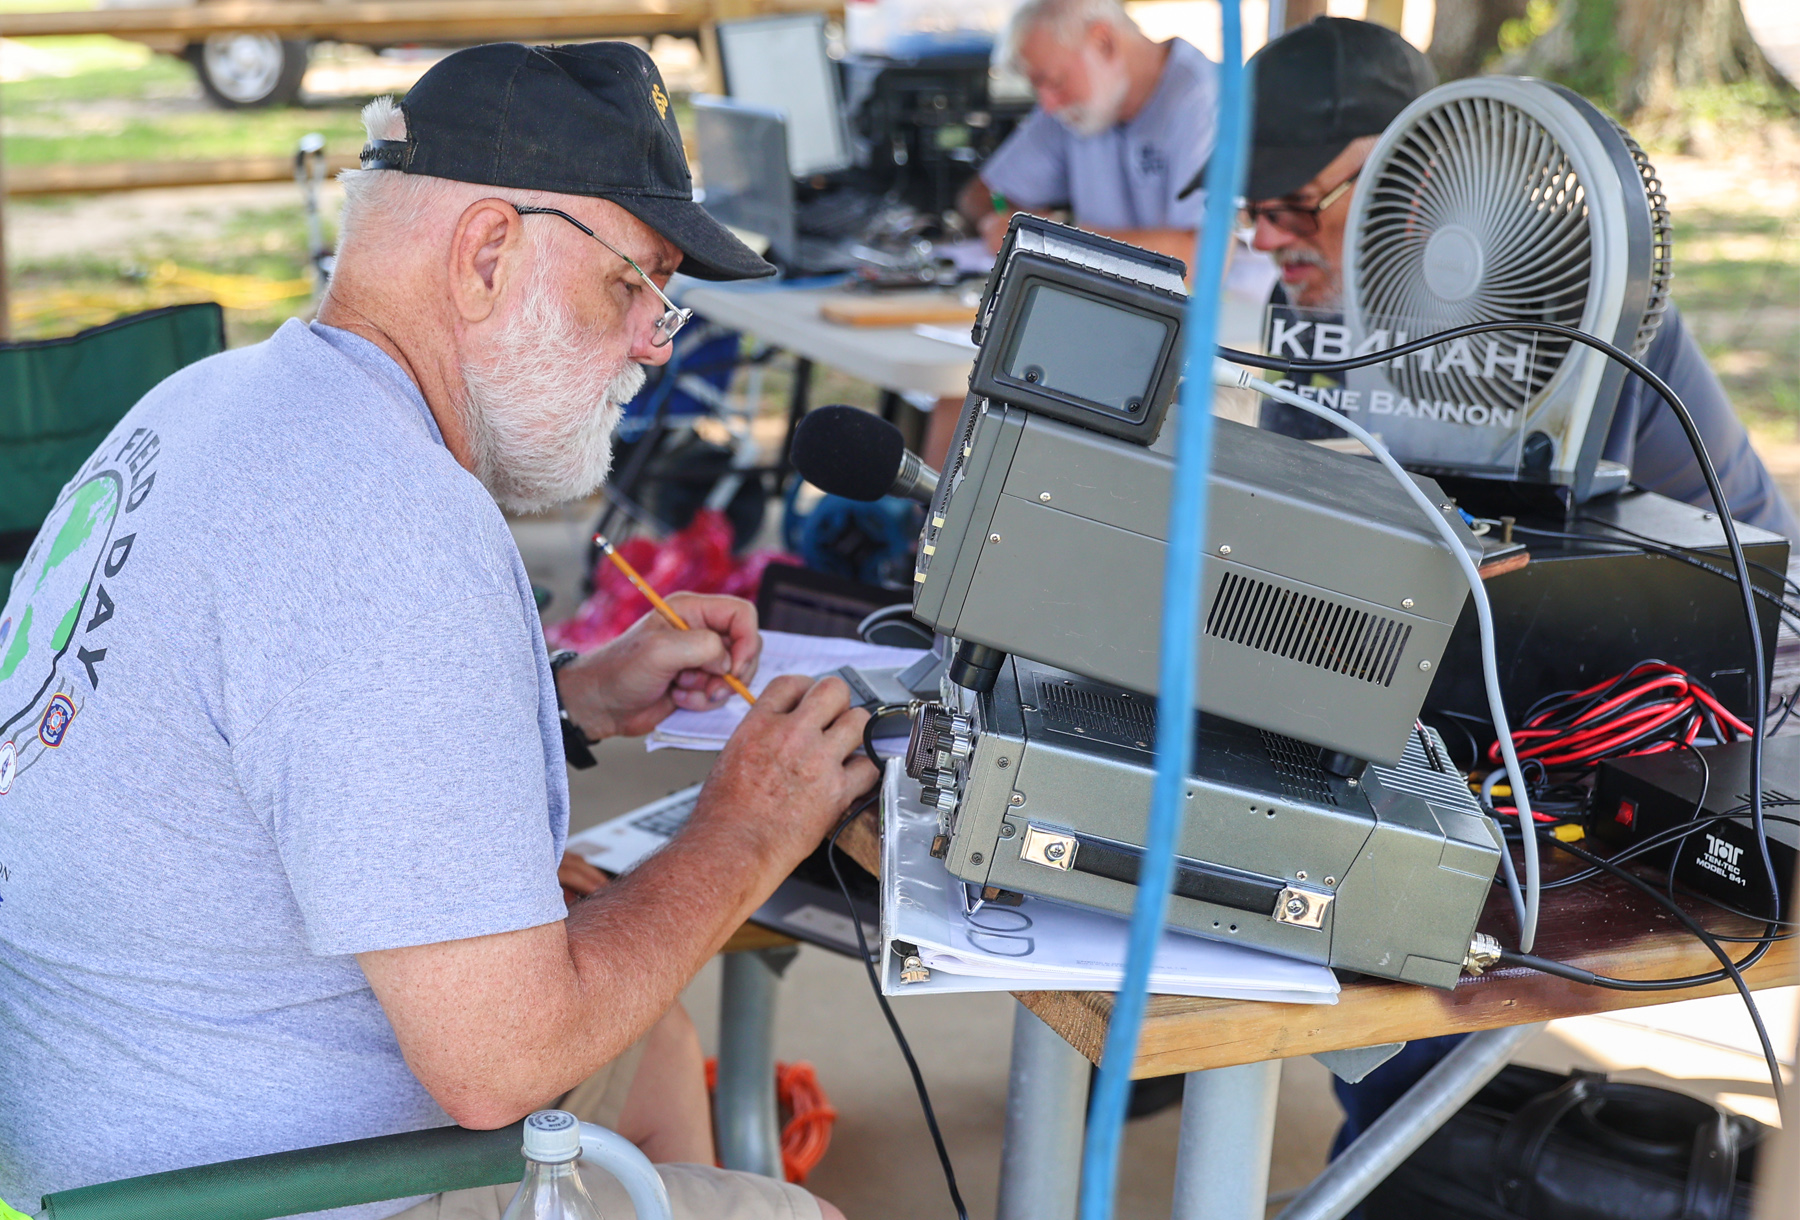 Local Hams Take To The Airwaves For Amateur Radio Field Day, Practicing Emergency Communications NorthEscambia picture